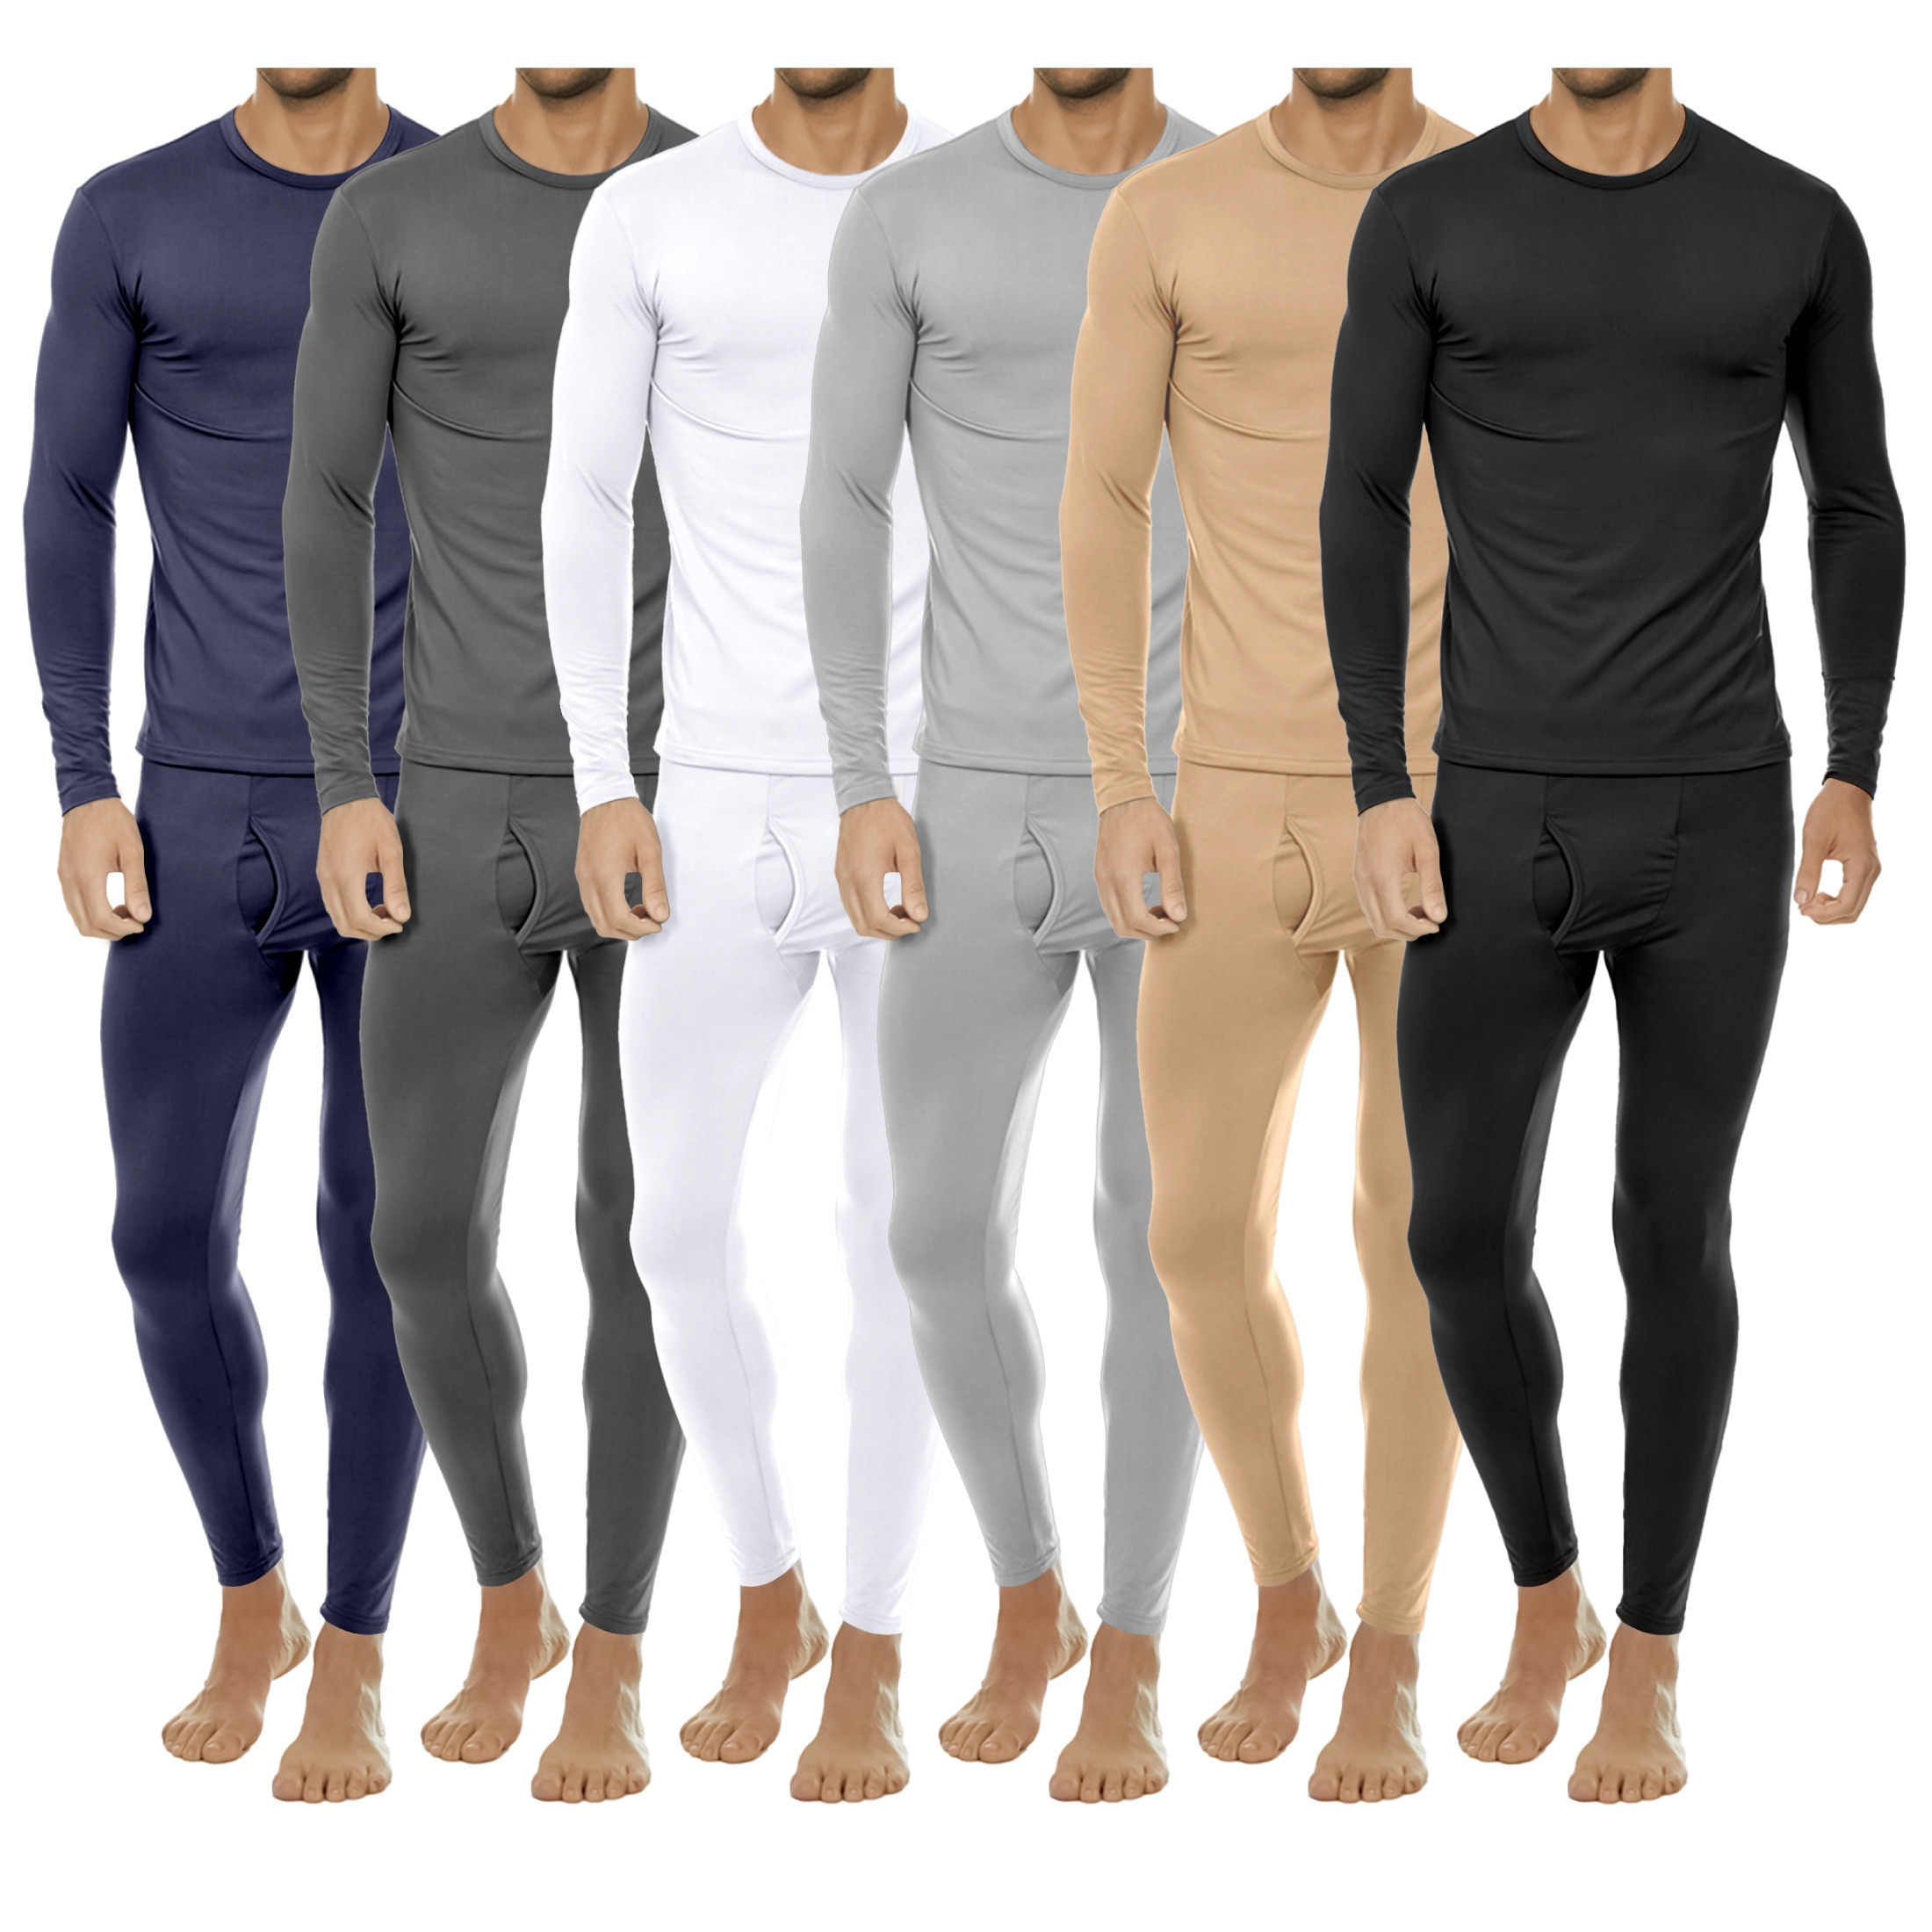 Men's Fleece Lined Thermal Underwear Set For Cold Weather - 2XL